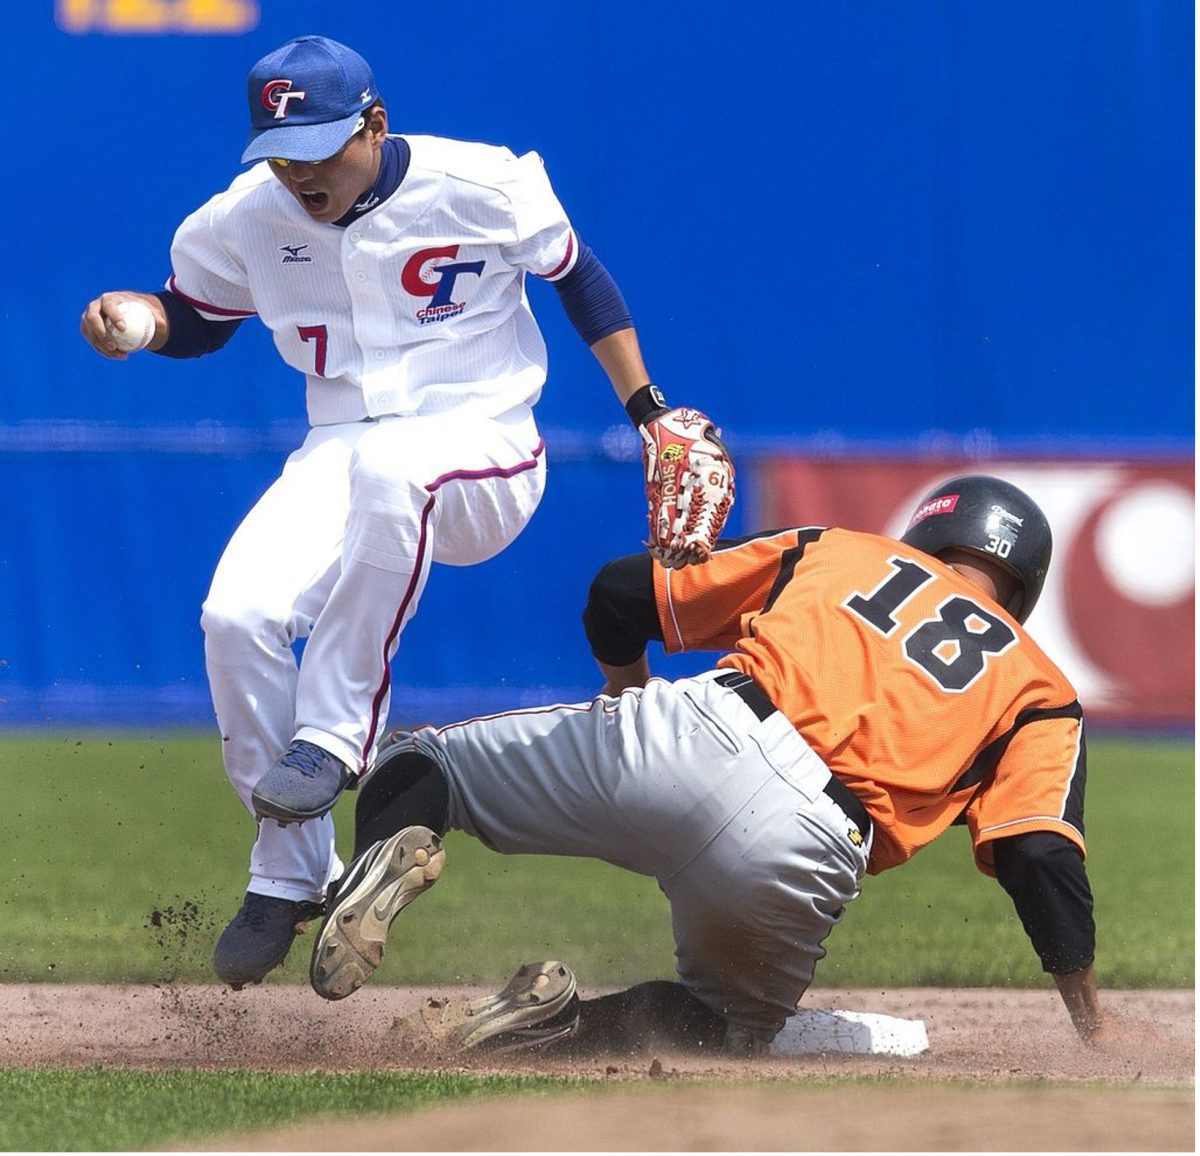 Gilmer Lampe of The Netherlands is out on second base in the group match between The Netherlands and Taiwan during the baseball Haarlem Honkbal Week in Haarlem, The Netherlands on 13 July. On the right Hsiao Po Ting of Taiwan. AFP PHOTO / ANP / KOEN SUYK netherlands out (Credit: KOEN SUYK/AFP via Getty Images)